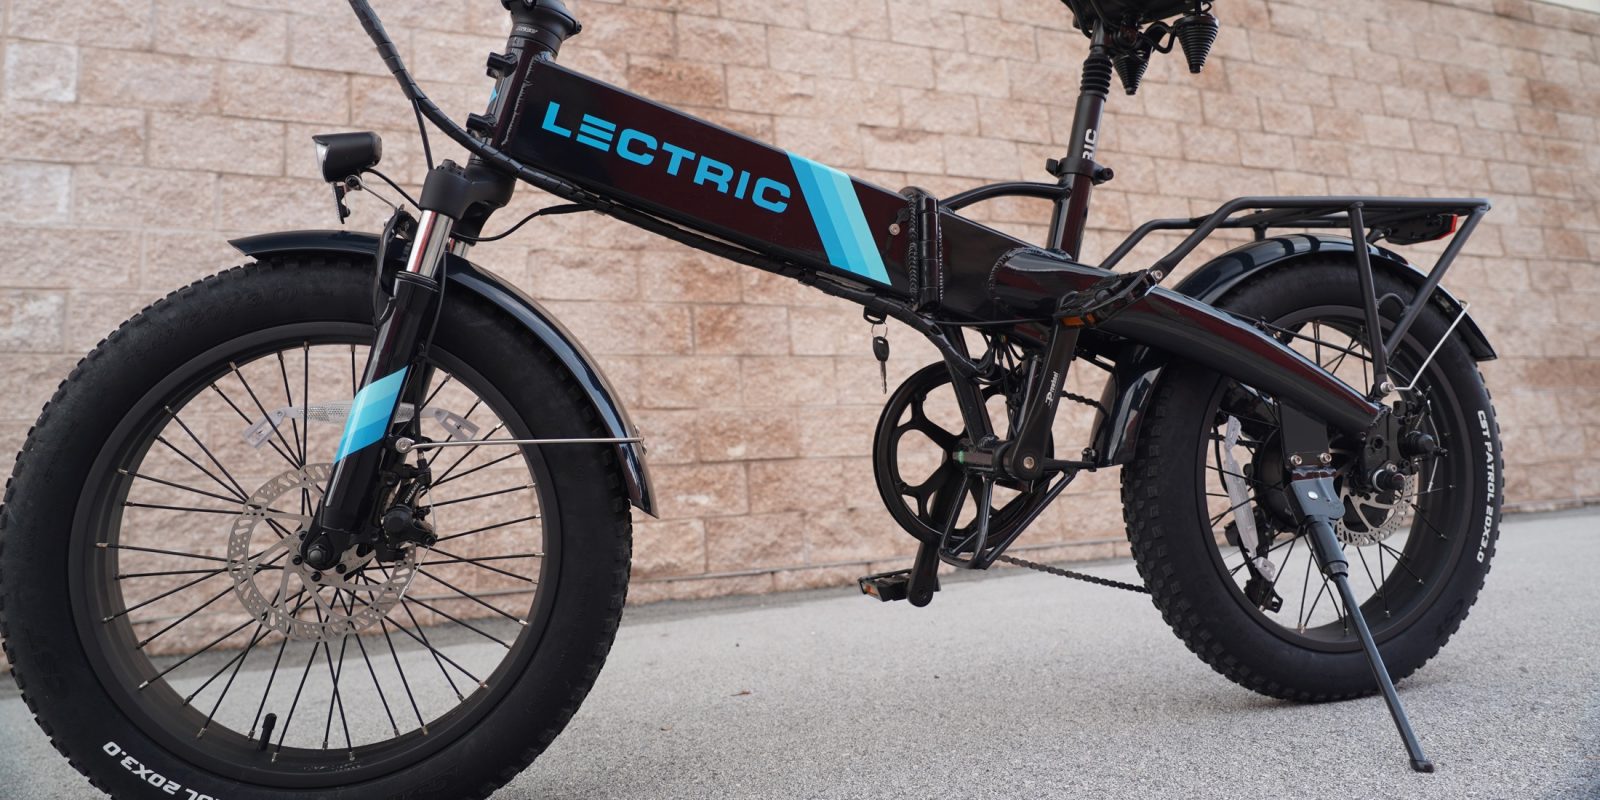 https://electrek.co/wp-content/uploads/sites/3/2021/10/lectric-xp-2_0-header.jpg?quality=82&strip=all&w=1600